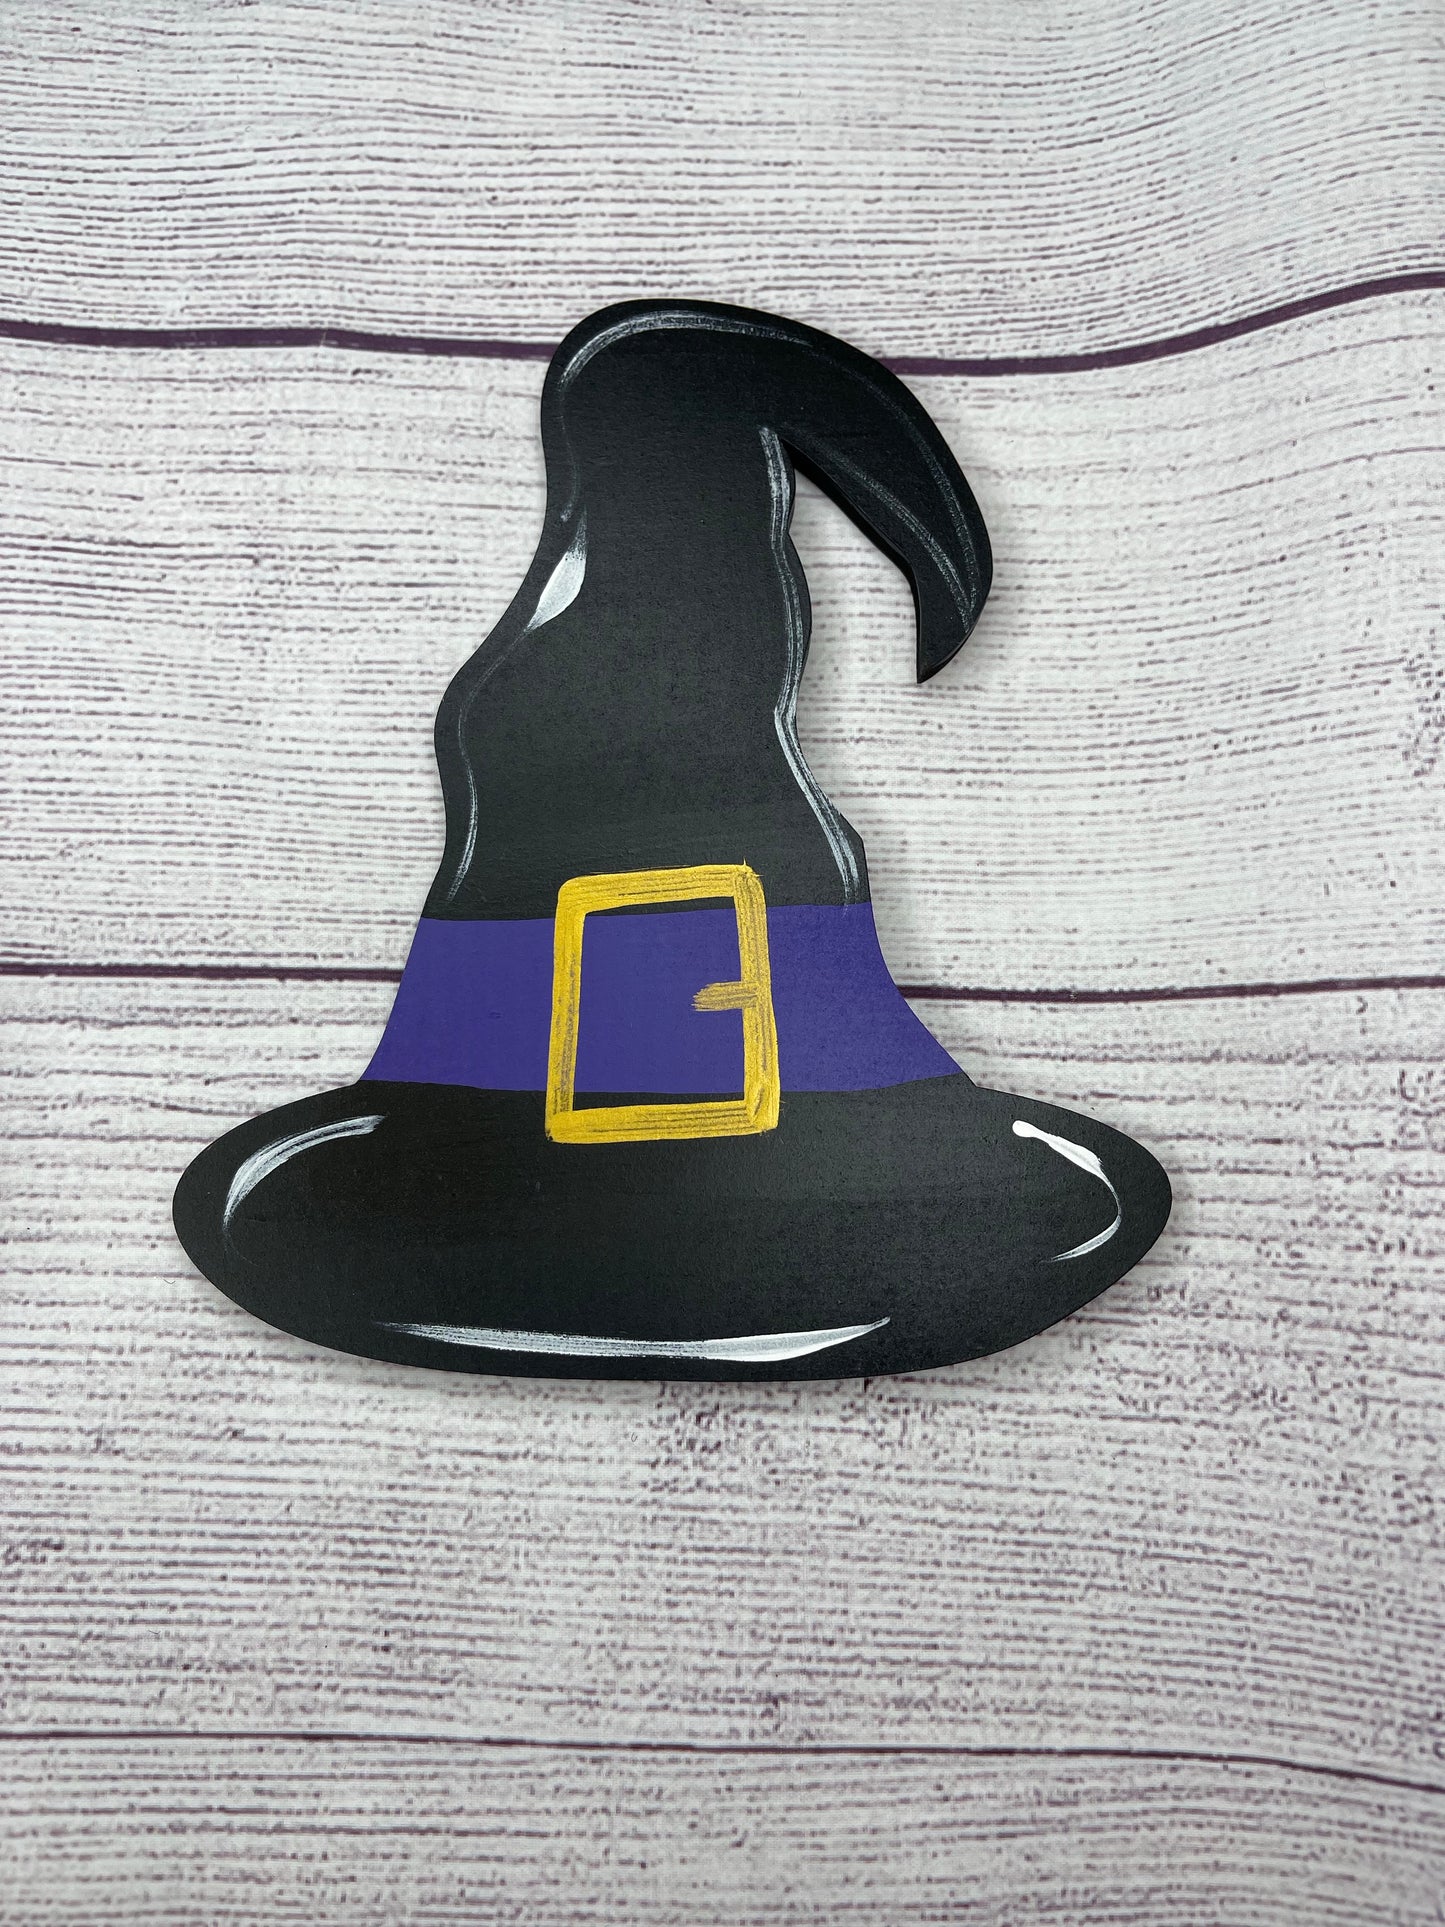 Witch Hat Interchangeable Attachment